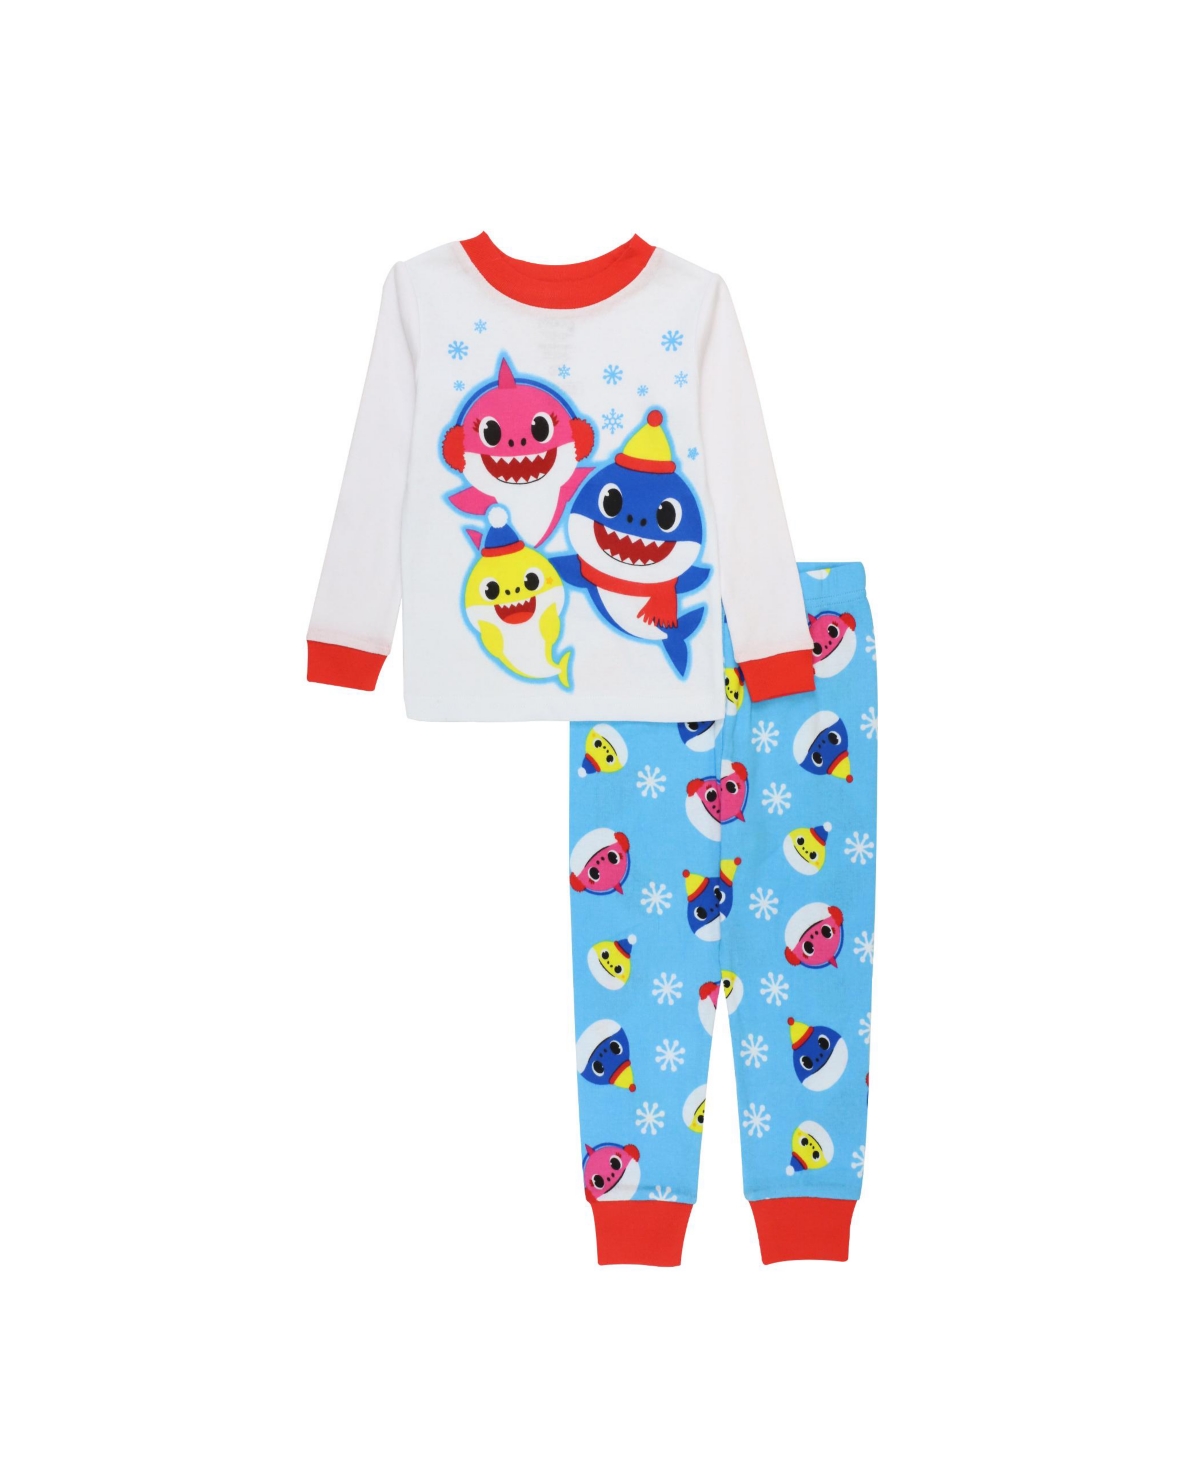 Ame Toddler Boys Baby Shark Top And Pajama Set, 2 Piece In Multi